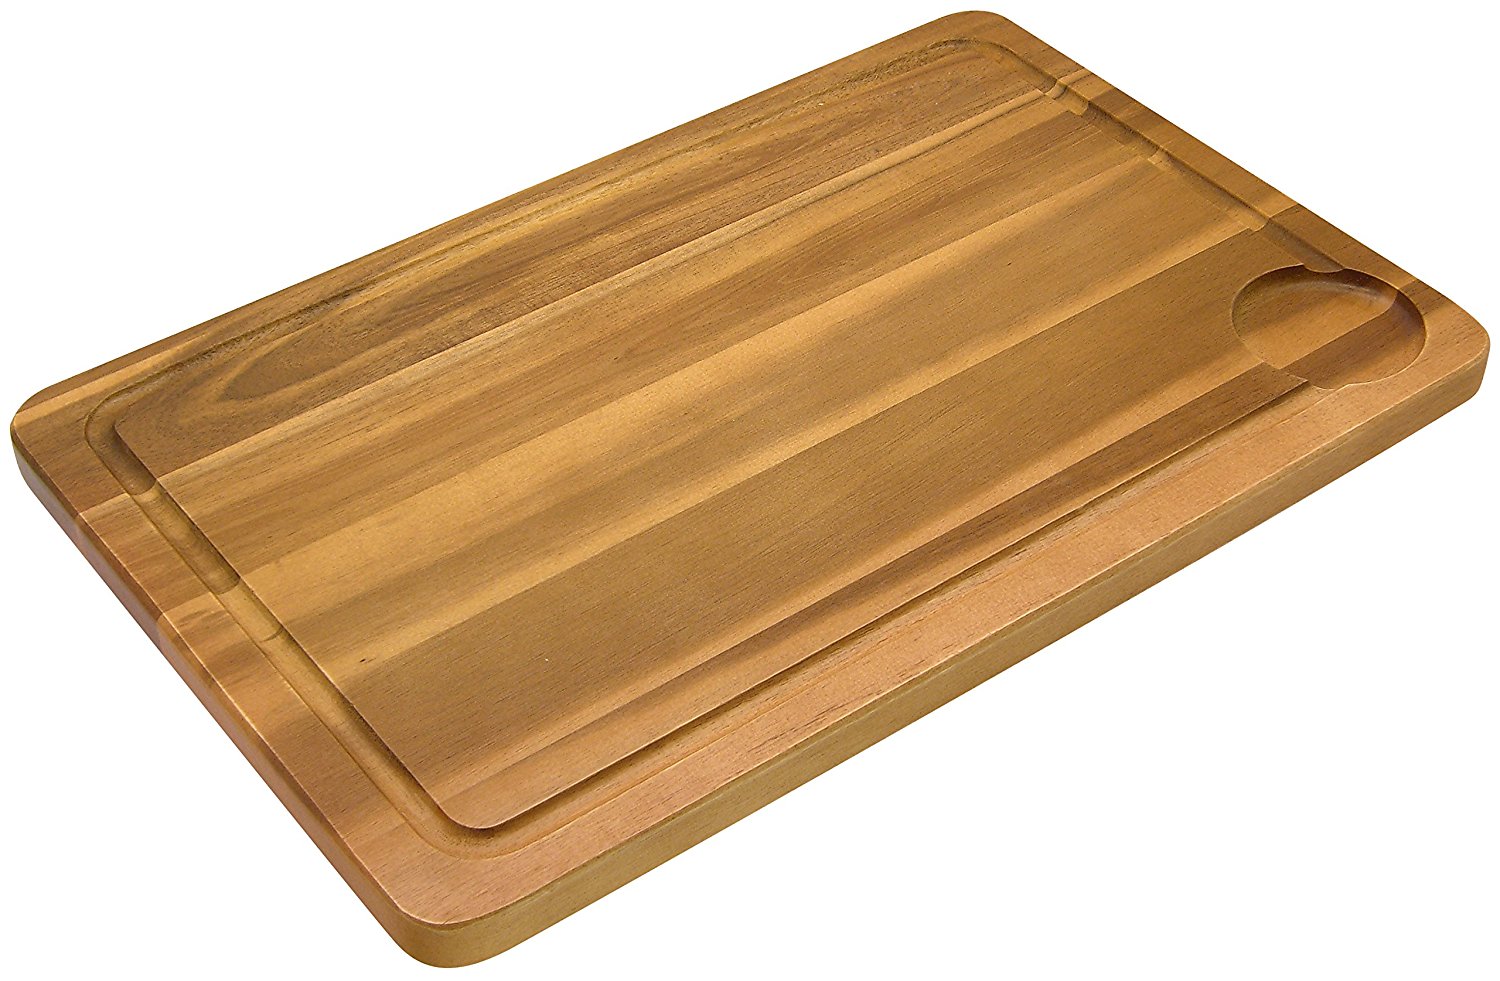 category_V1010 - Wooden Chopping Board 18 x 12